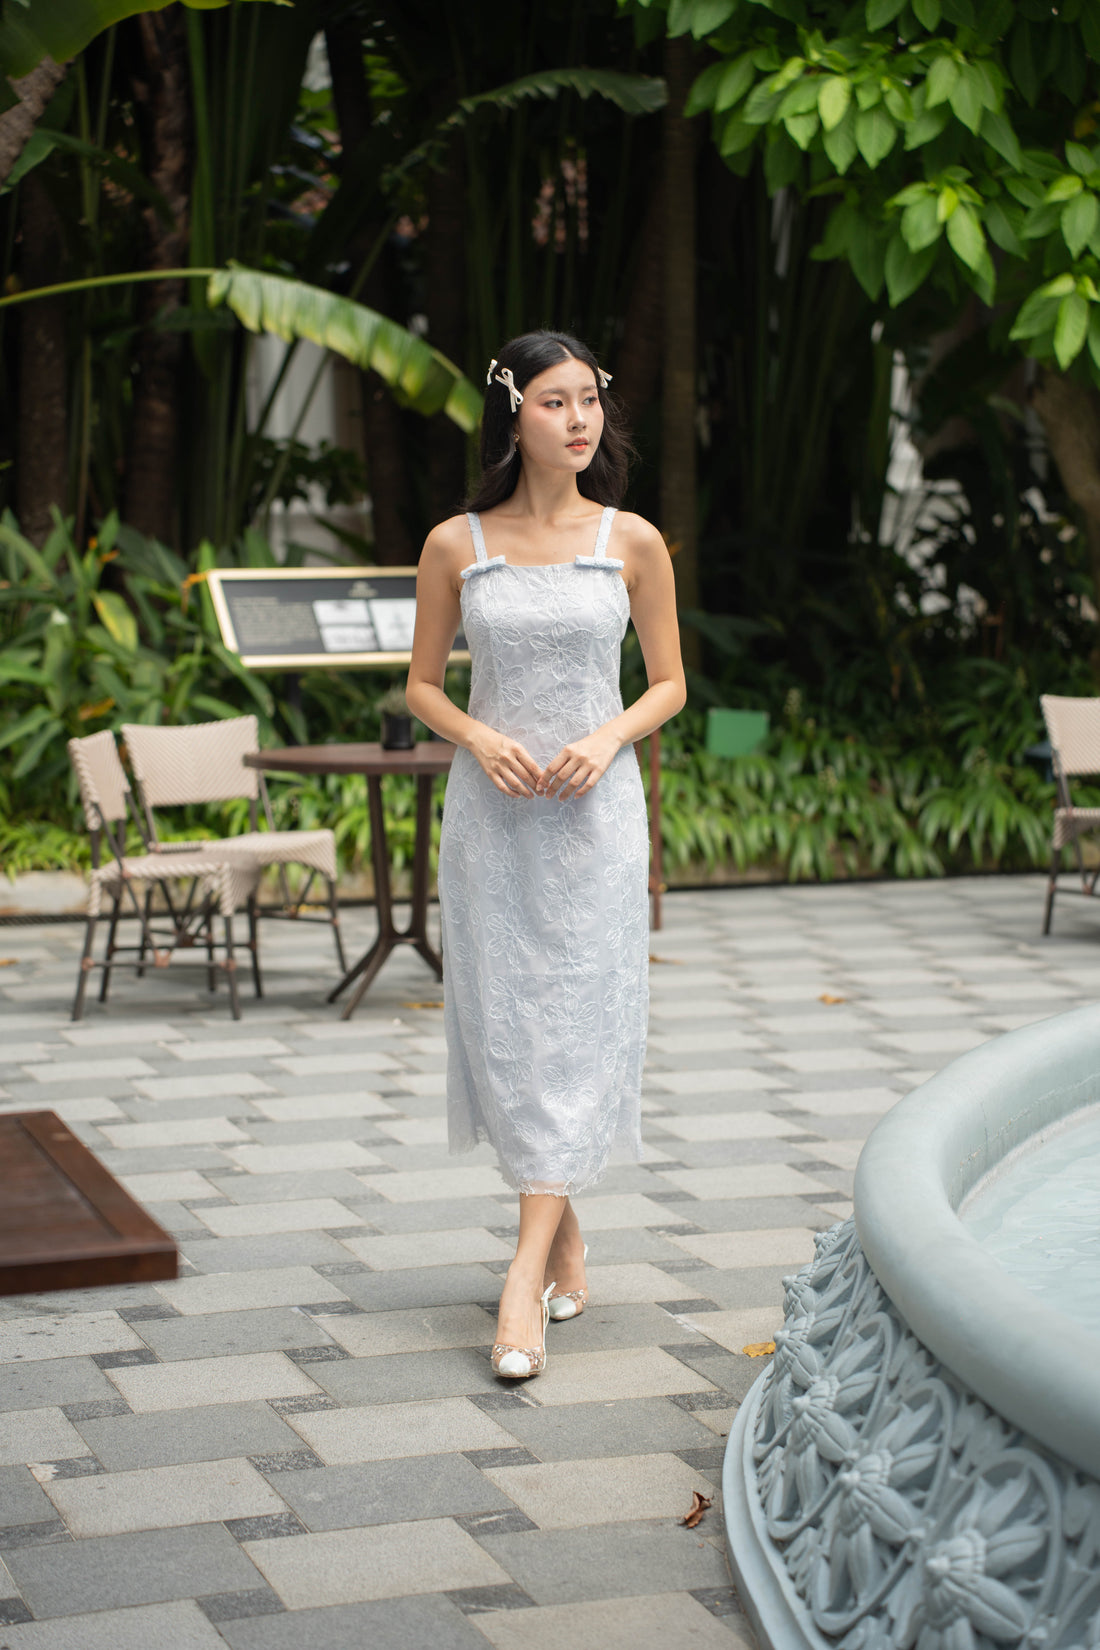 Ultimate Guide to Planning Your Bridal Dress Shopping Experience in Singapore